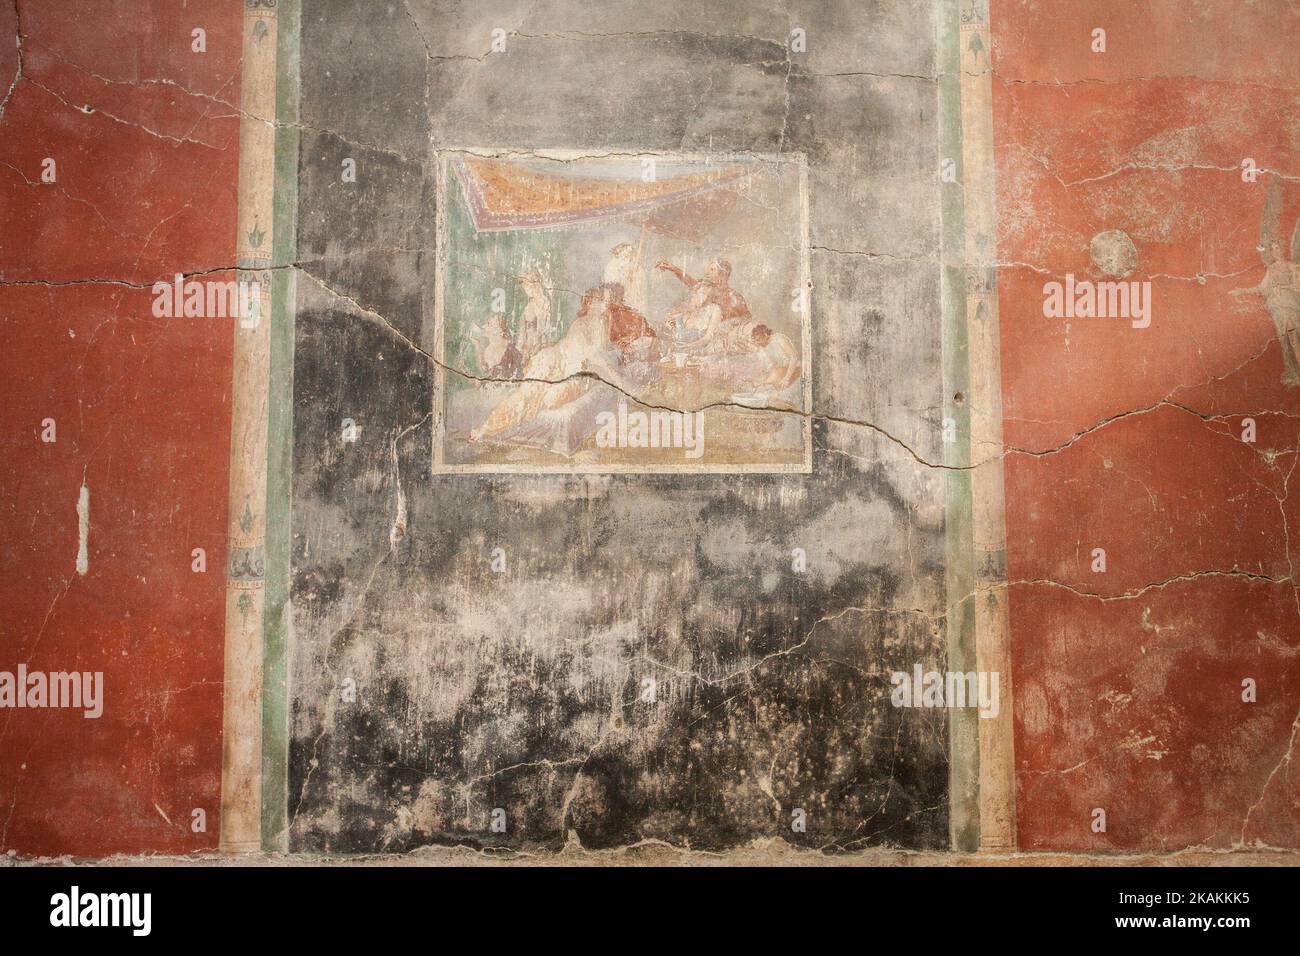 A fresco into the insula of the Chaste Lovers into the archeological ruins of Pompeii, along Via dell'Abbondanza, on February 8, 2017. The Domus of the Chaste Lovers will be open to the public in extraordinary session from Saturday 11 to Tuesday 14 of February on the occasion of St. Valentine's Day. After it will be closed for about four years to enable the complete restoration, enhancement and reconfiguration of the area. (Photo by Paolo Manzo/NurPhoto) *** Please Use Credit from Credit Field *** Stock Photo